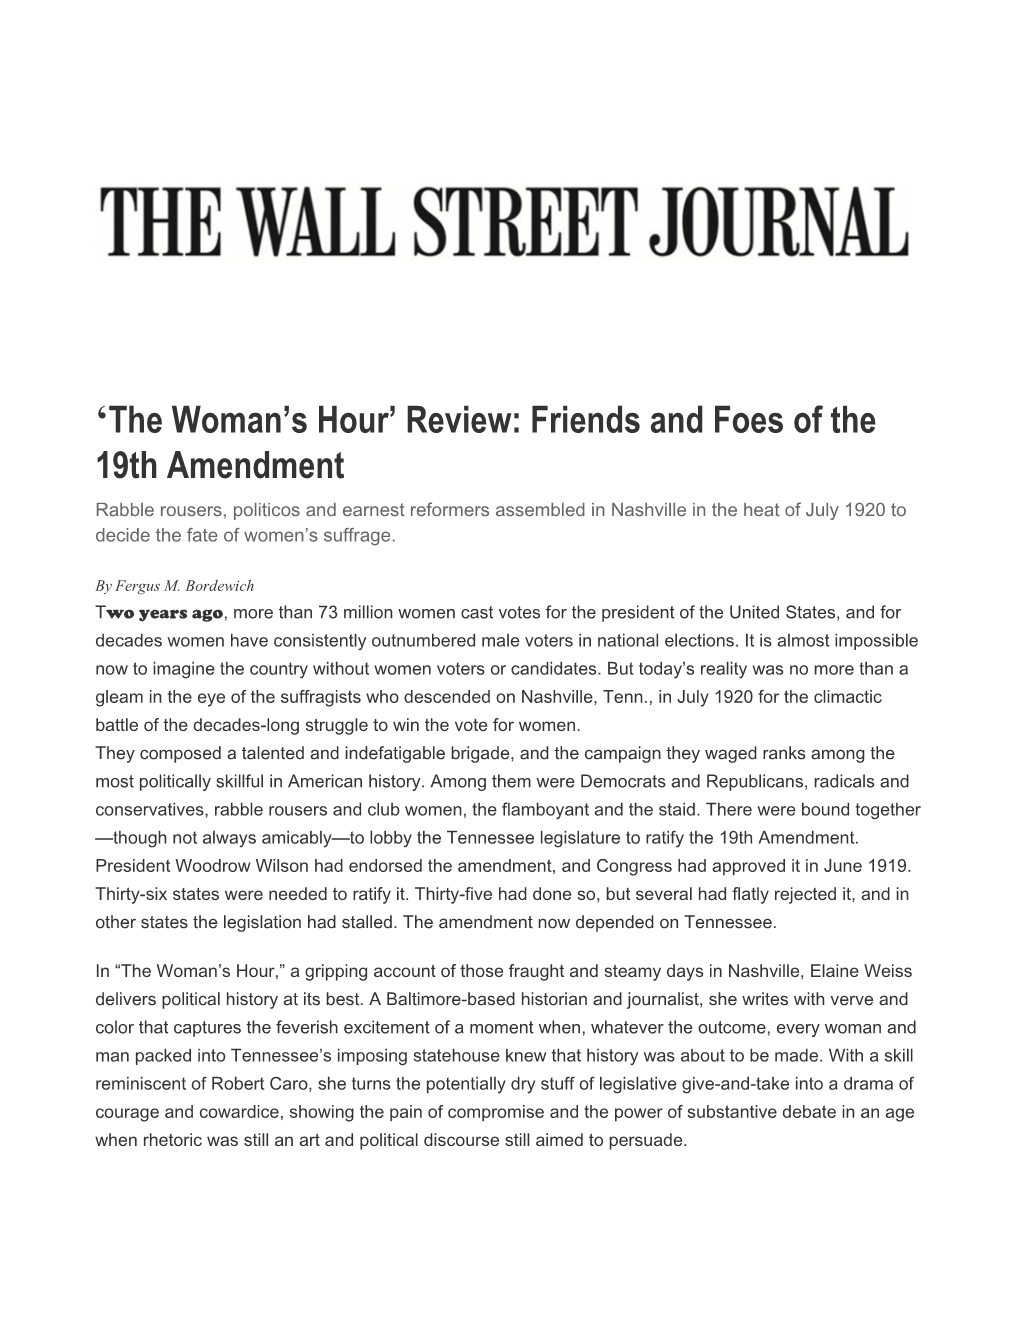 The Woman's Hour Review: Friends and Foes of the 19Th Amendment